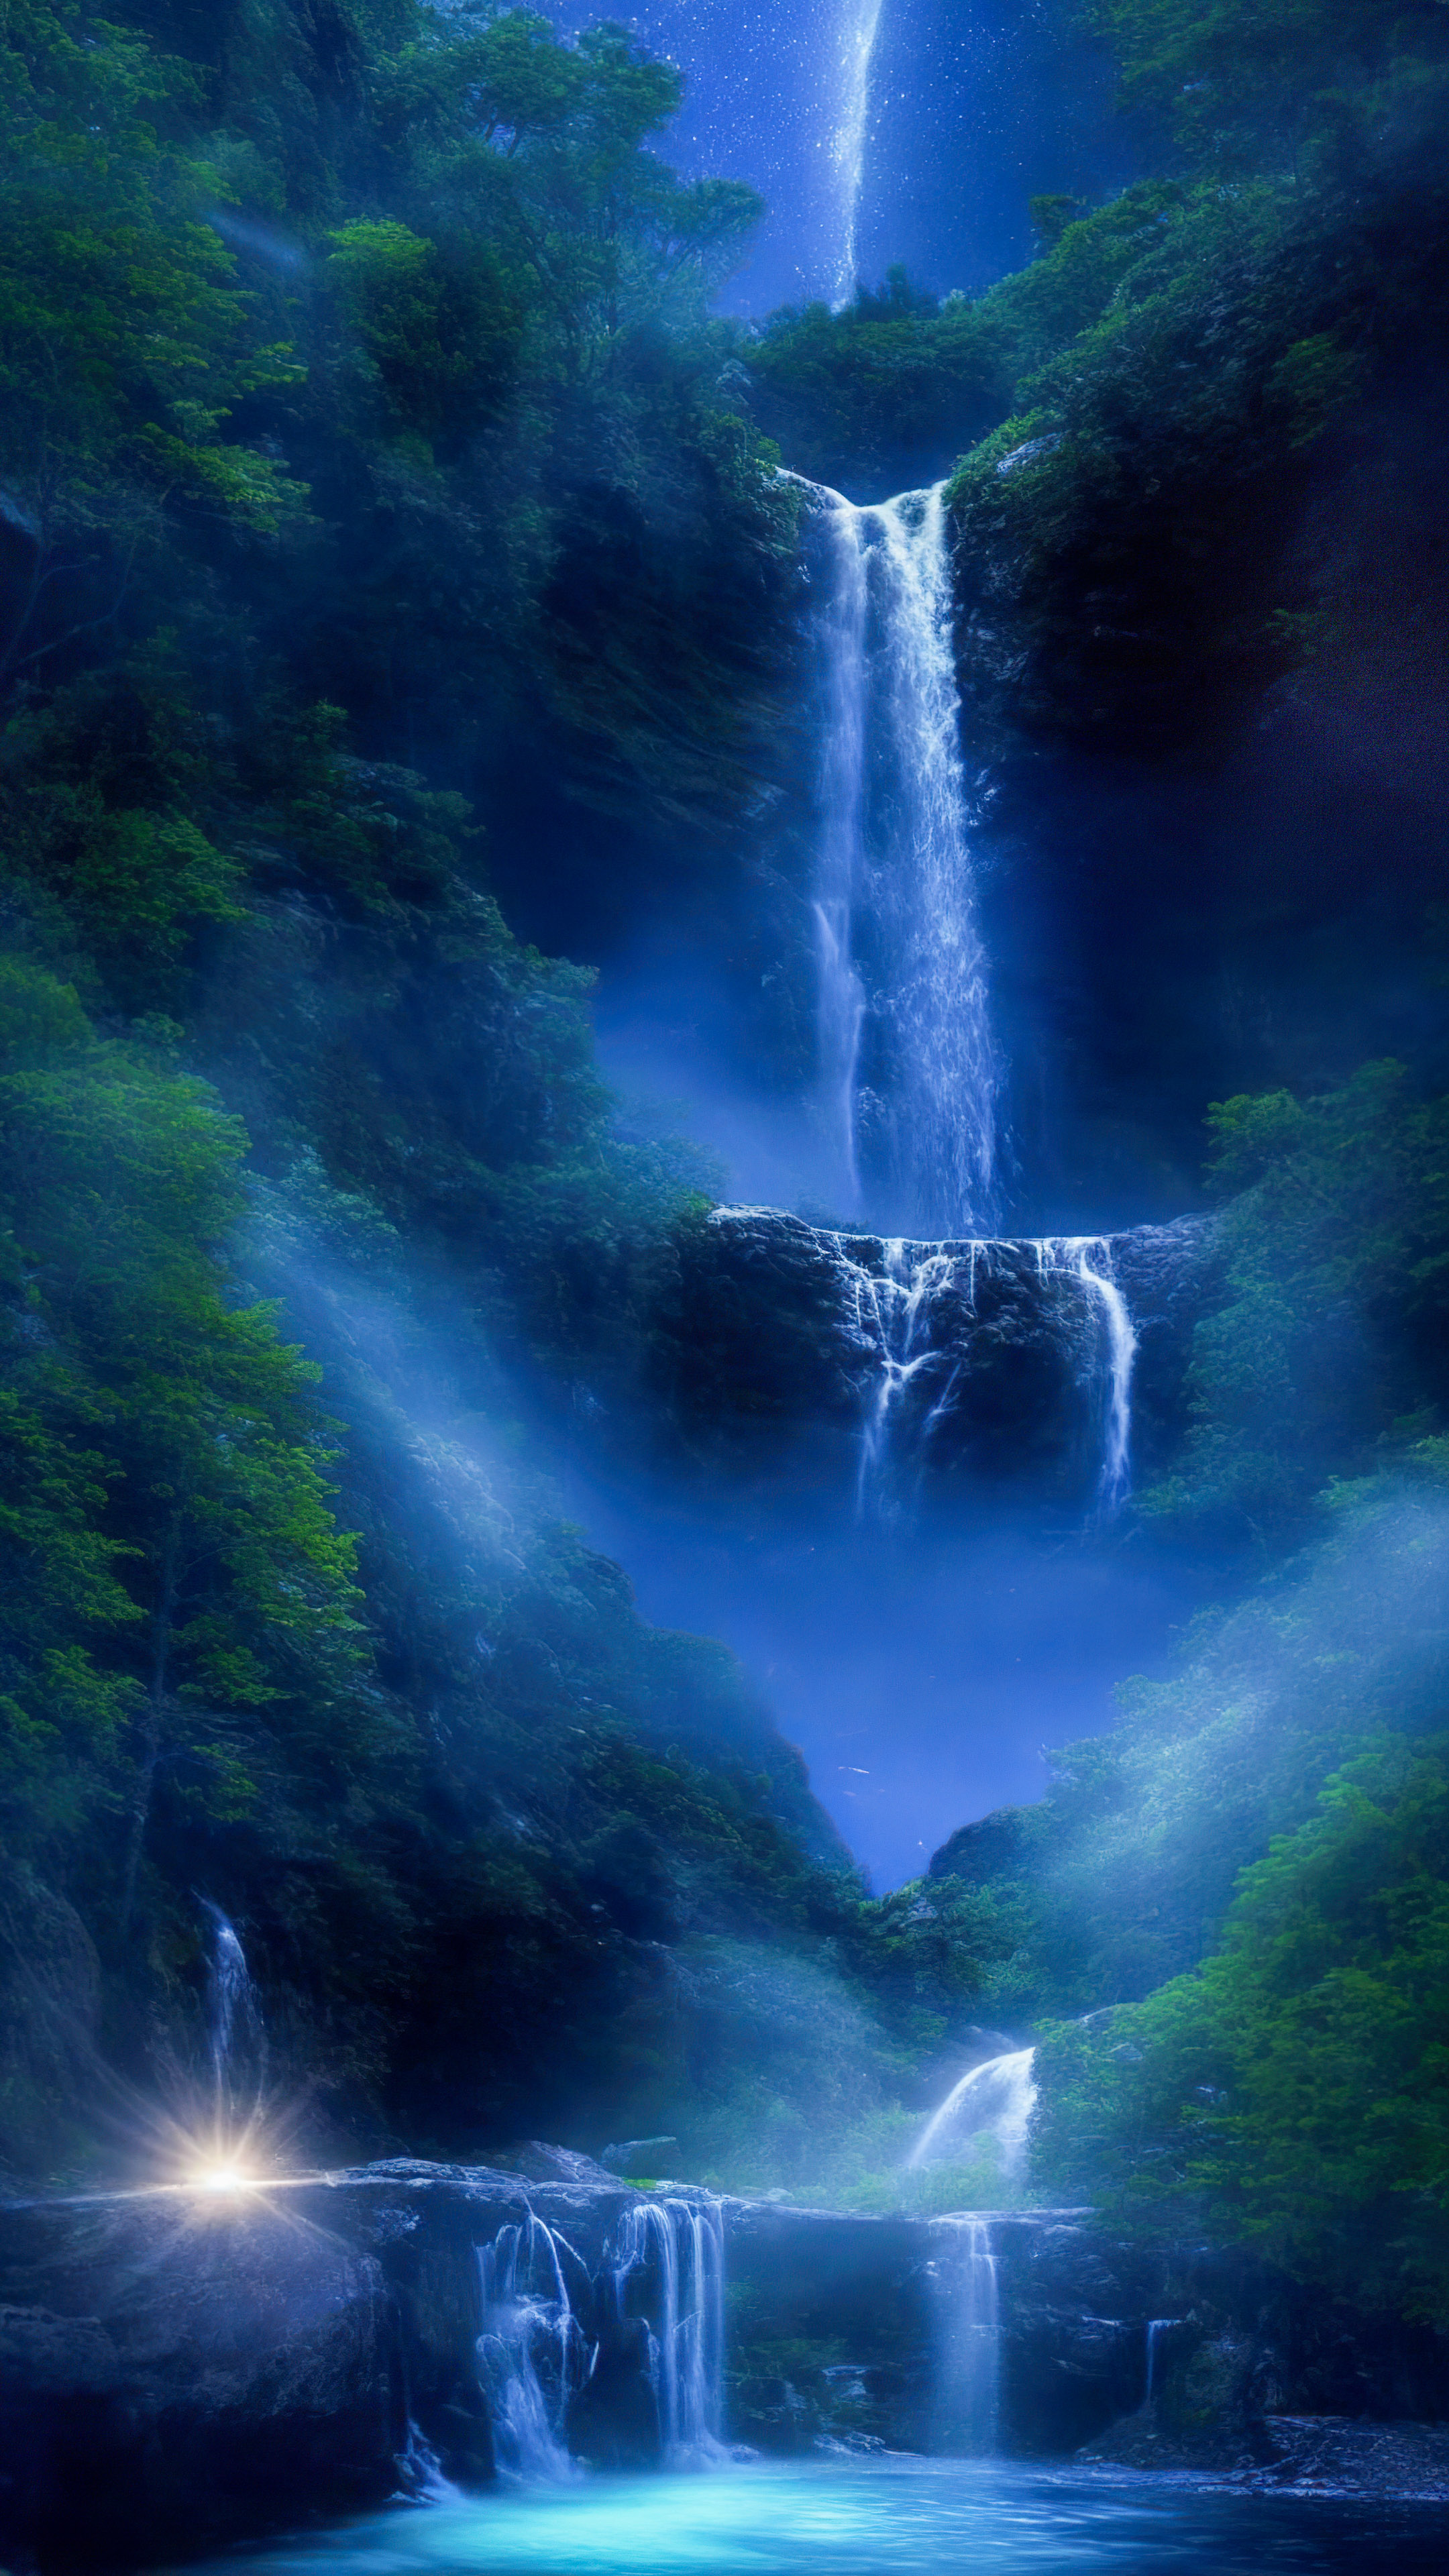 Immerse yourself in the enchantment of our nature wallpaper in HD, featuring a magical waterfall illuminated by moonlight, with fireflies dancing around its cascading waters.